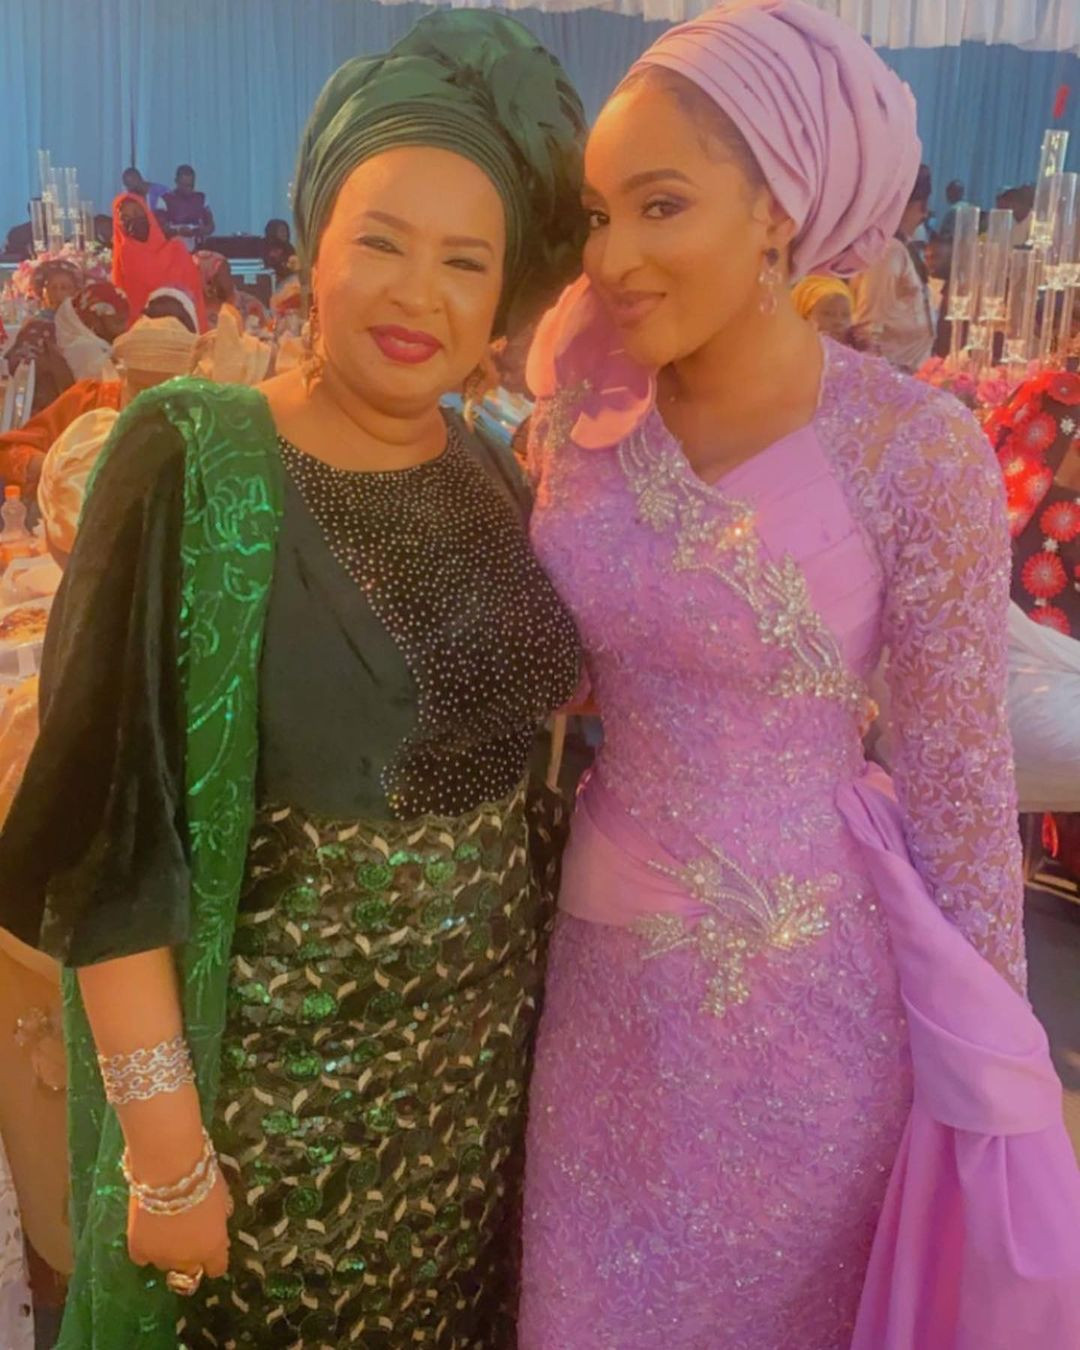 Osinbajo, Obasanjo, Nyesom Wike, others attend wedding dinner of Zara Bala, daughter of Bauchi state governor and her husband, Marla Sheriff (photos/videos)